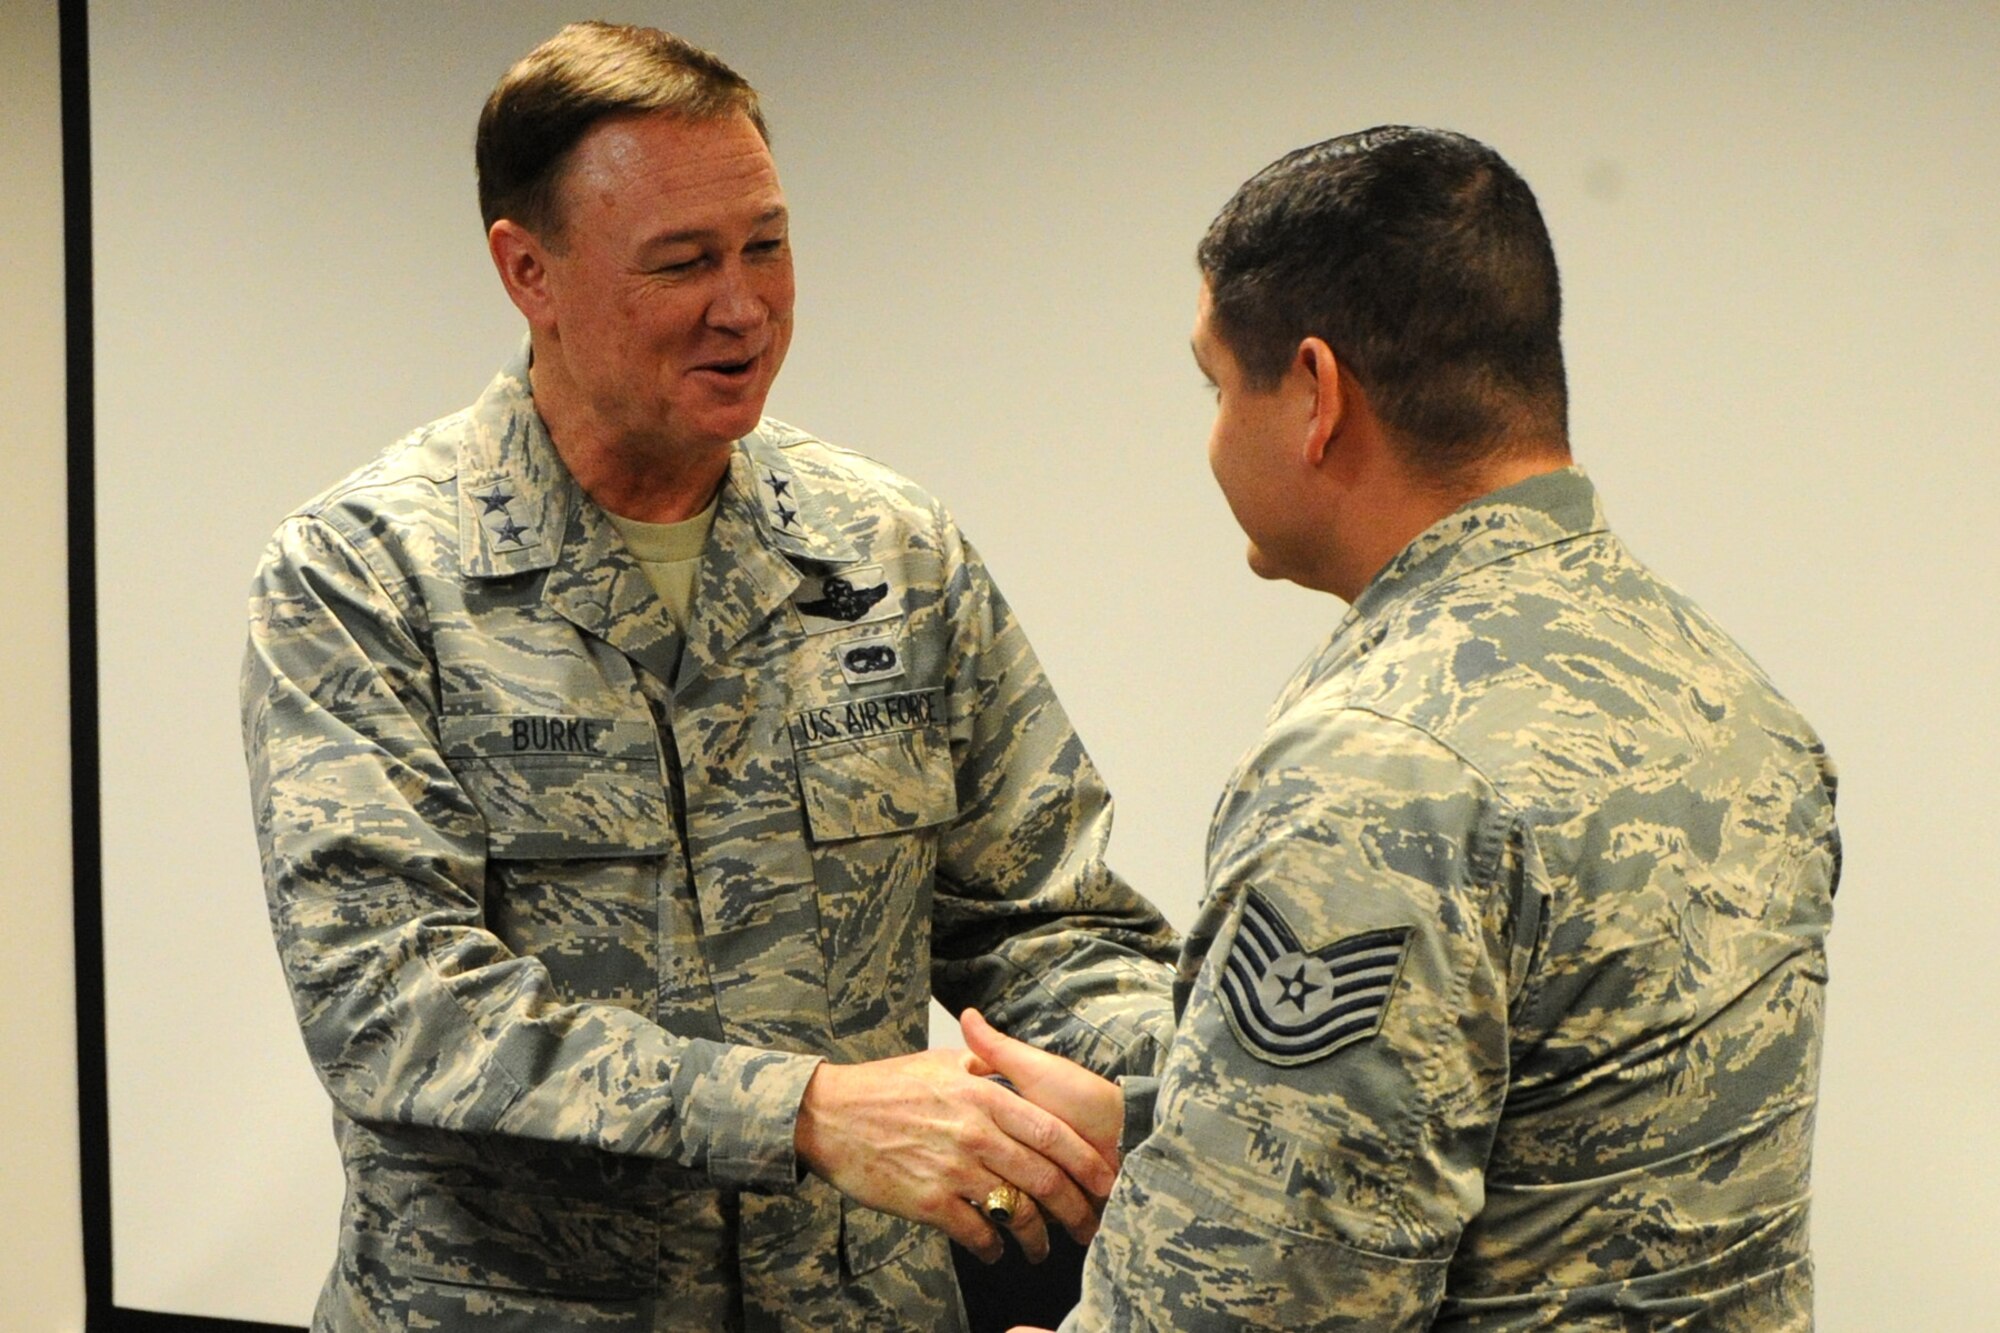 Air Force District of Washington Commander Maj. Gen. Darryl W. Burke coins TSgt Aaron Cantu, 11th Civil Engineer Squadron Explosive Ordnance Disposal journeyman, on Joint Base Andrews, Md., Oct. 23, 2015. Burke communicates his appreciation for the EOD Airmen’s sacrifice for the mission and recognized excellence within their career field. (U.S. Air Force photo/Staff Sgt. Matt Davis)